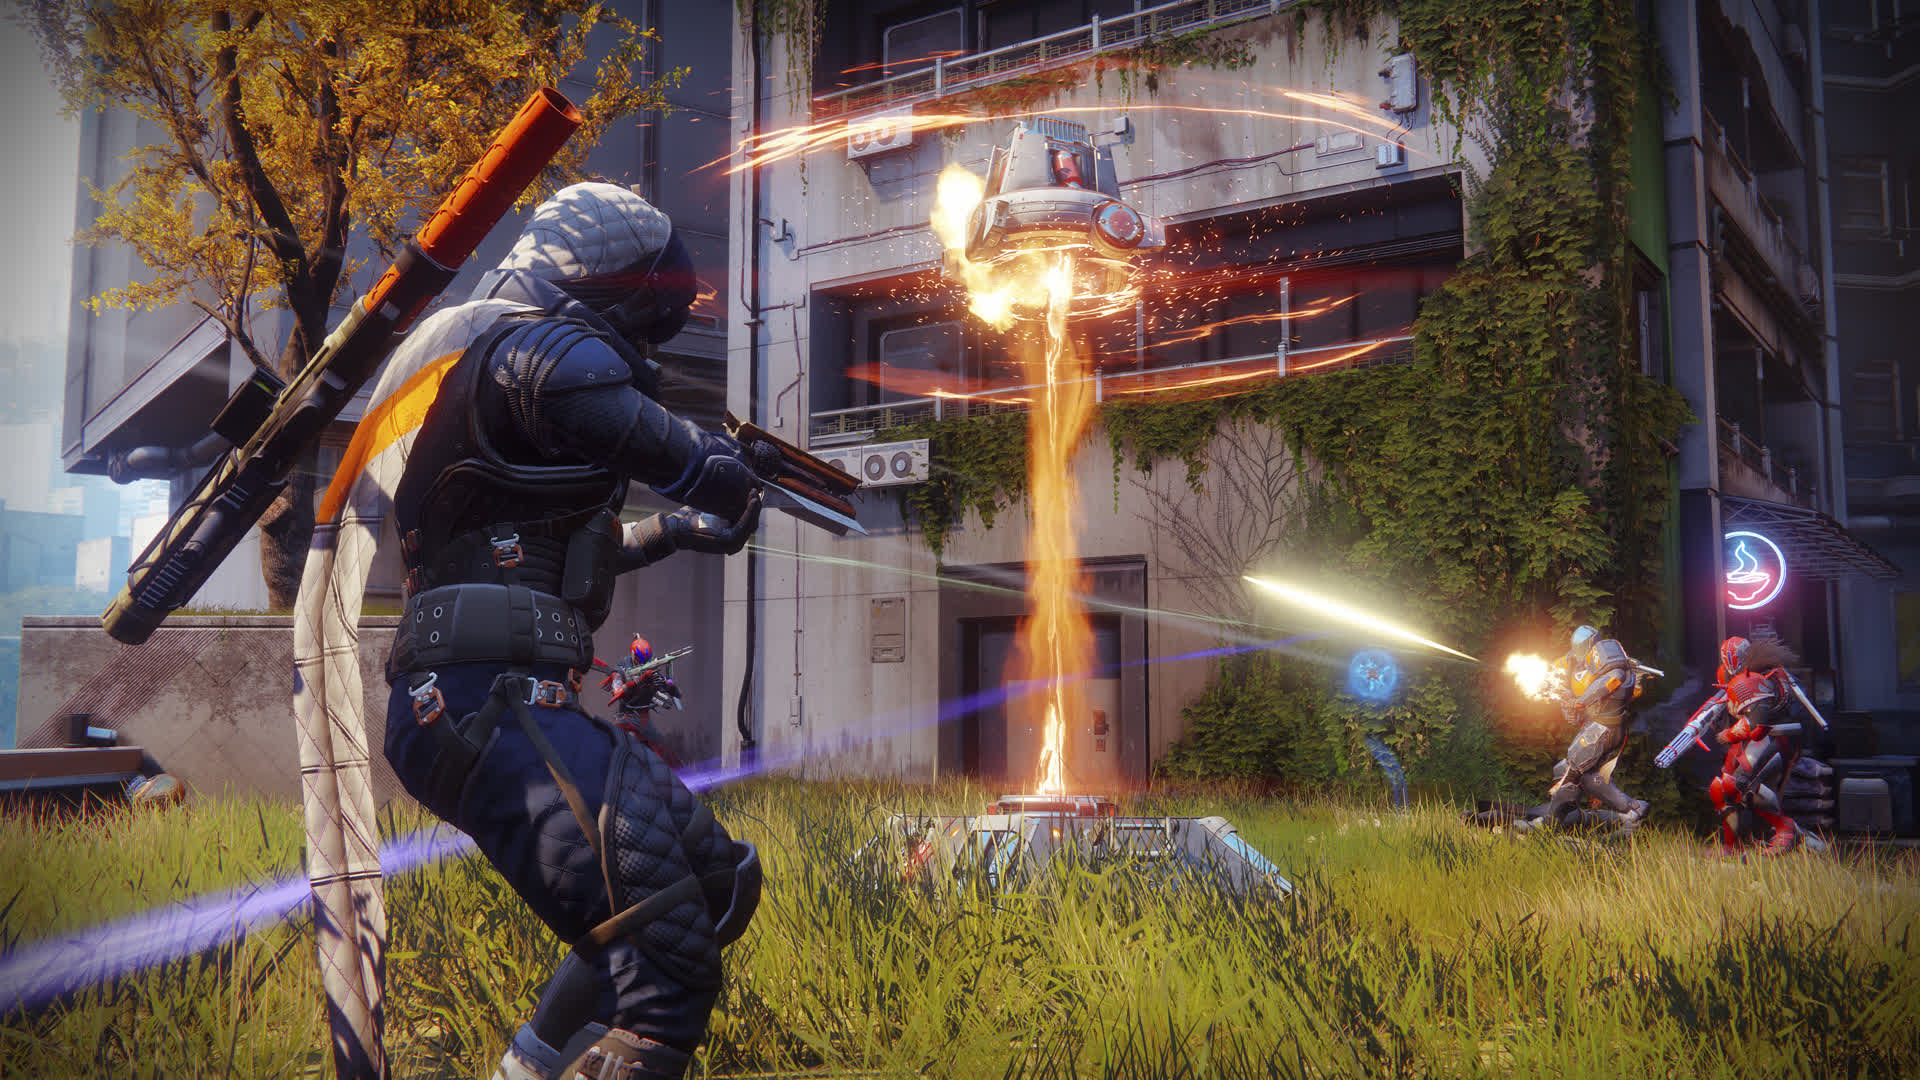 Destiny 2 cheat maker accuses Bungie of hacking and reverse engineering